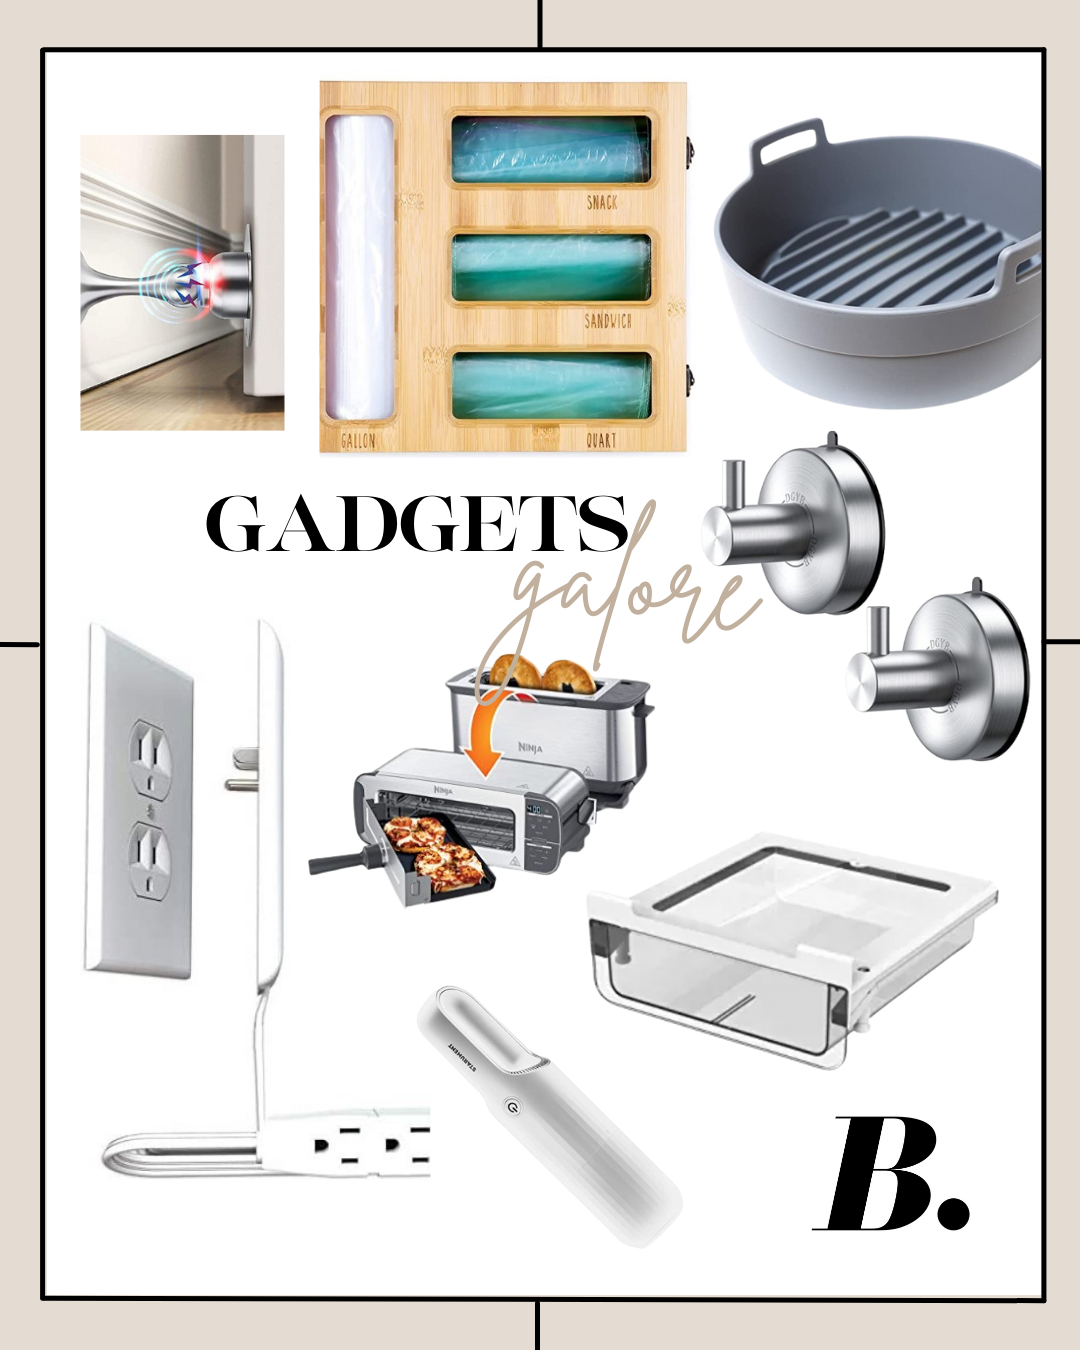 Best home gadgets, household gadgets to make life easie, smart home gadgets, home gadgets that work, best home gadgets on amazon, erin Busbee, fashion blogger over 40, telluride, co